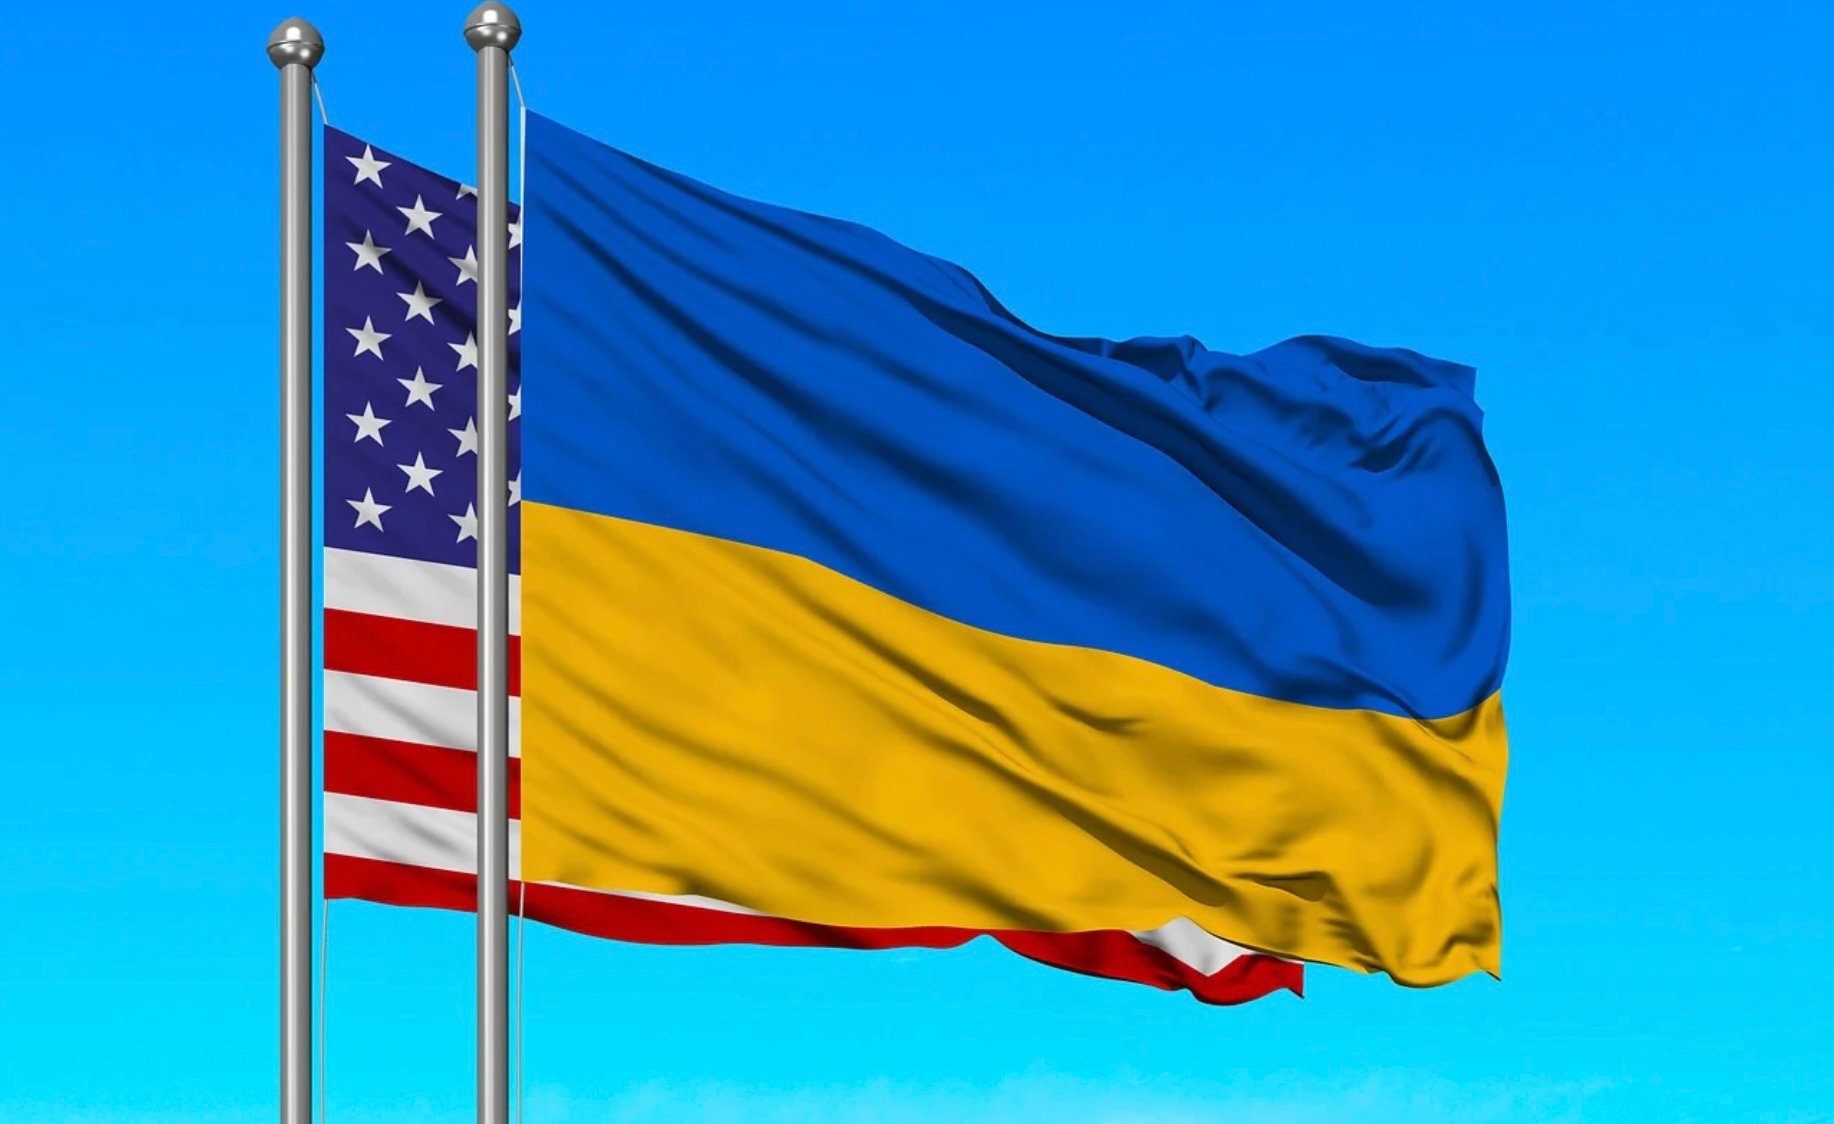 LAWRENCE SELLIN EXCLUSIVE: Are the Ukrainian Biolabs Another US Military-Industrial-Complex Money Scam Involving the Bidens or Biowarfare Facilities or Both?